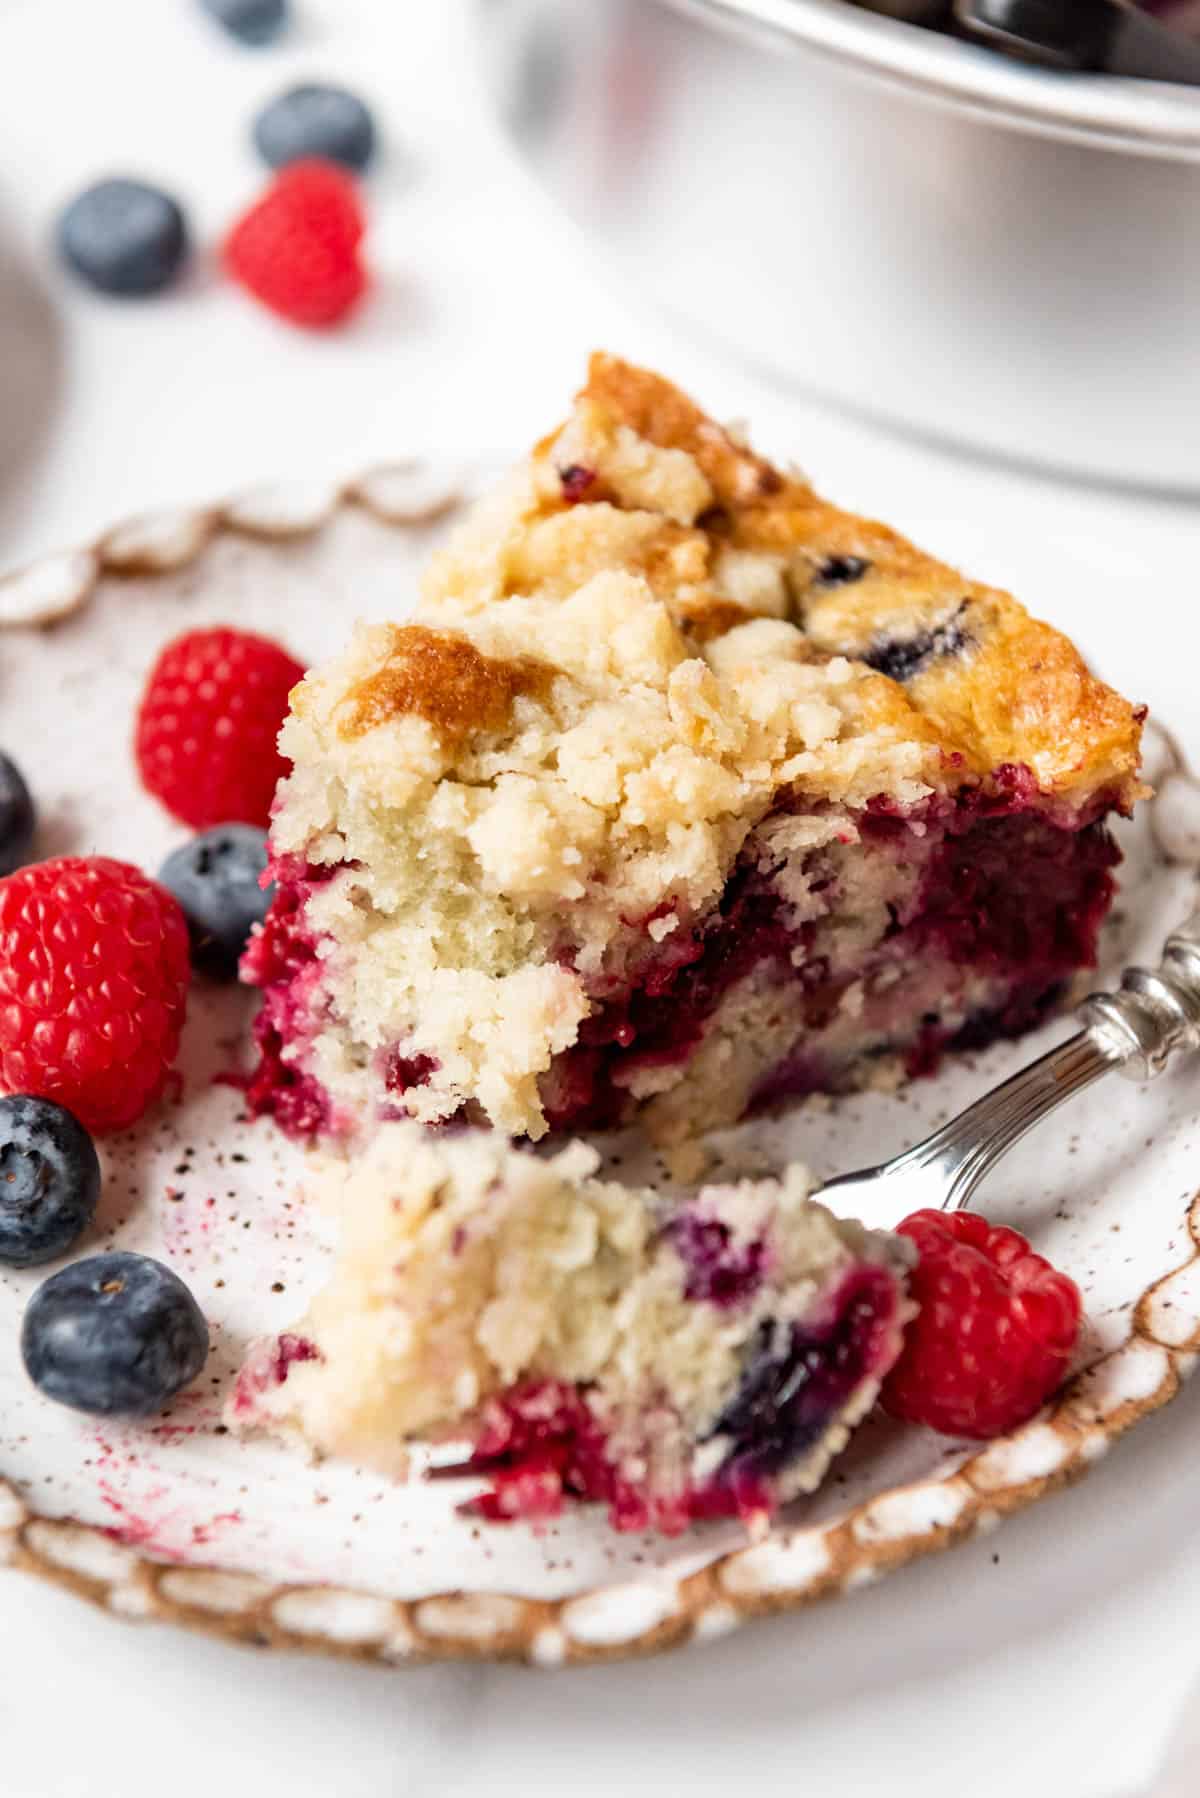 A slice of mixed berry breakfast cake on a plate with blueberries and raspberries and a bite taken out of it.